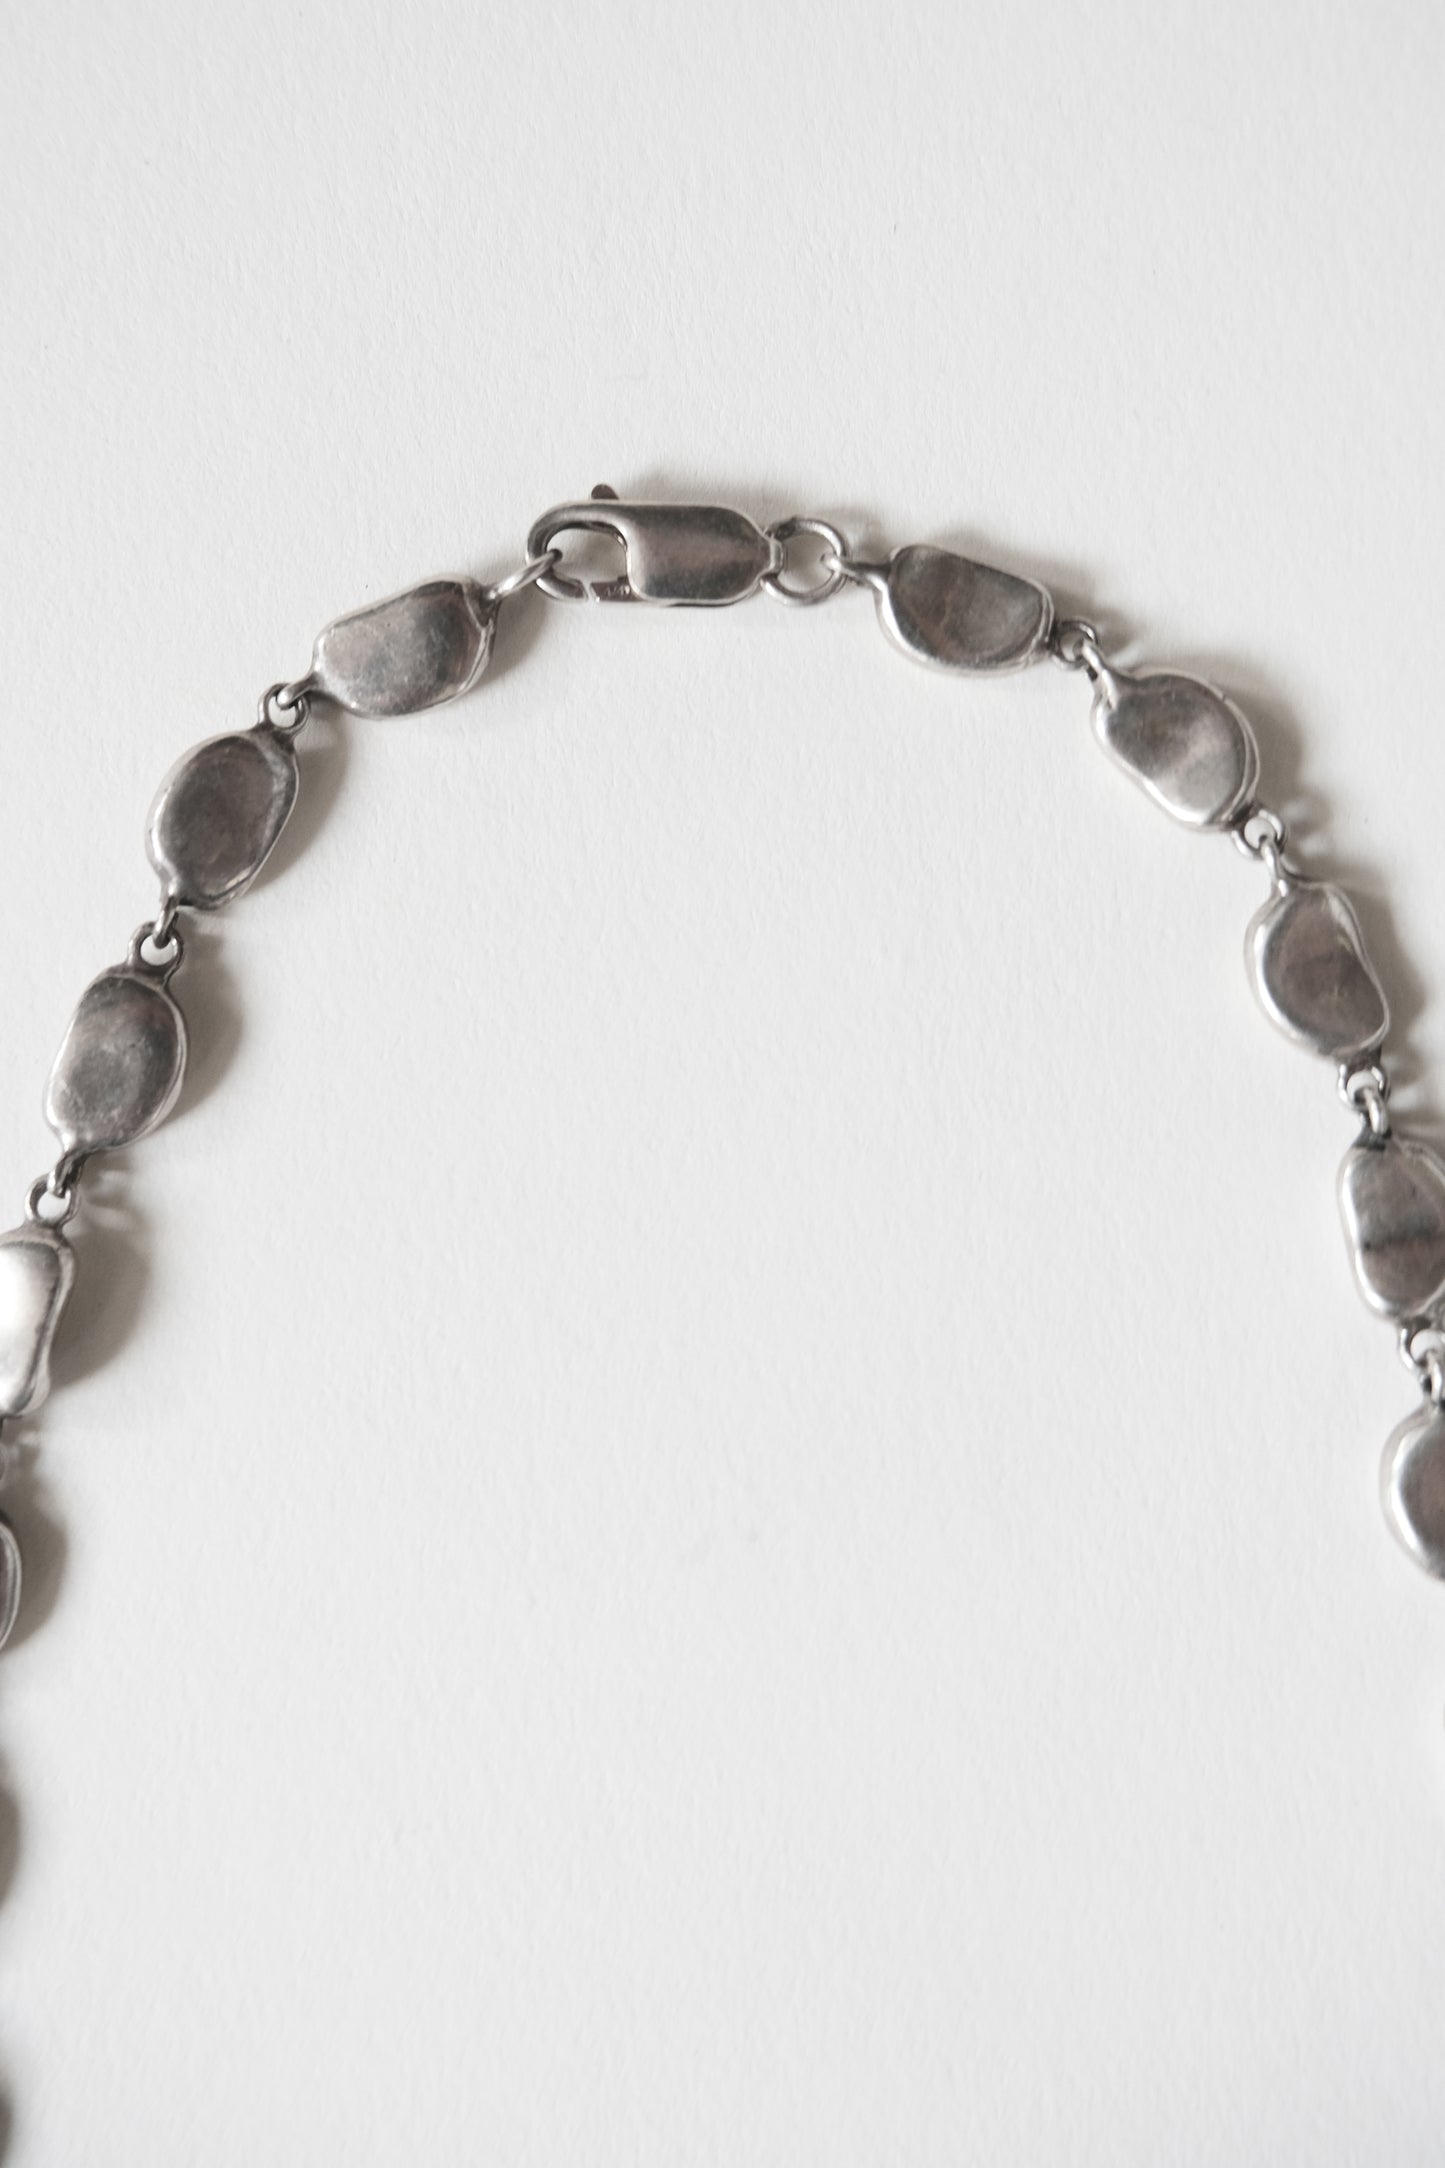 Silver Beans Necklace